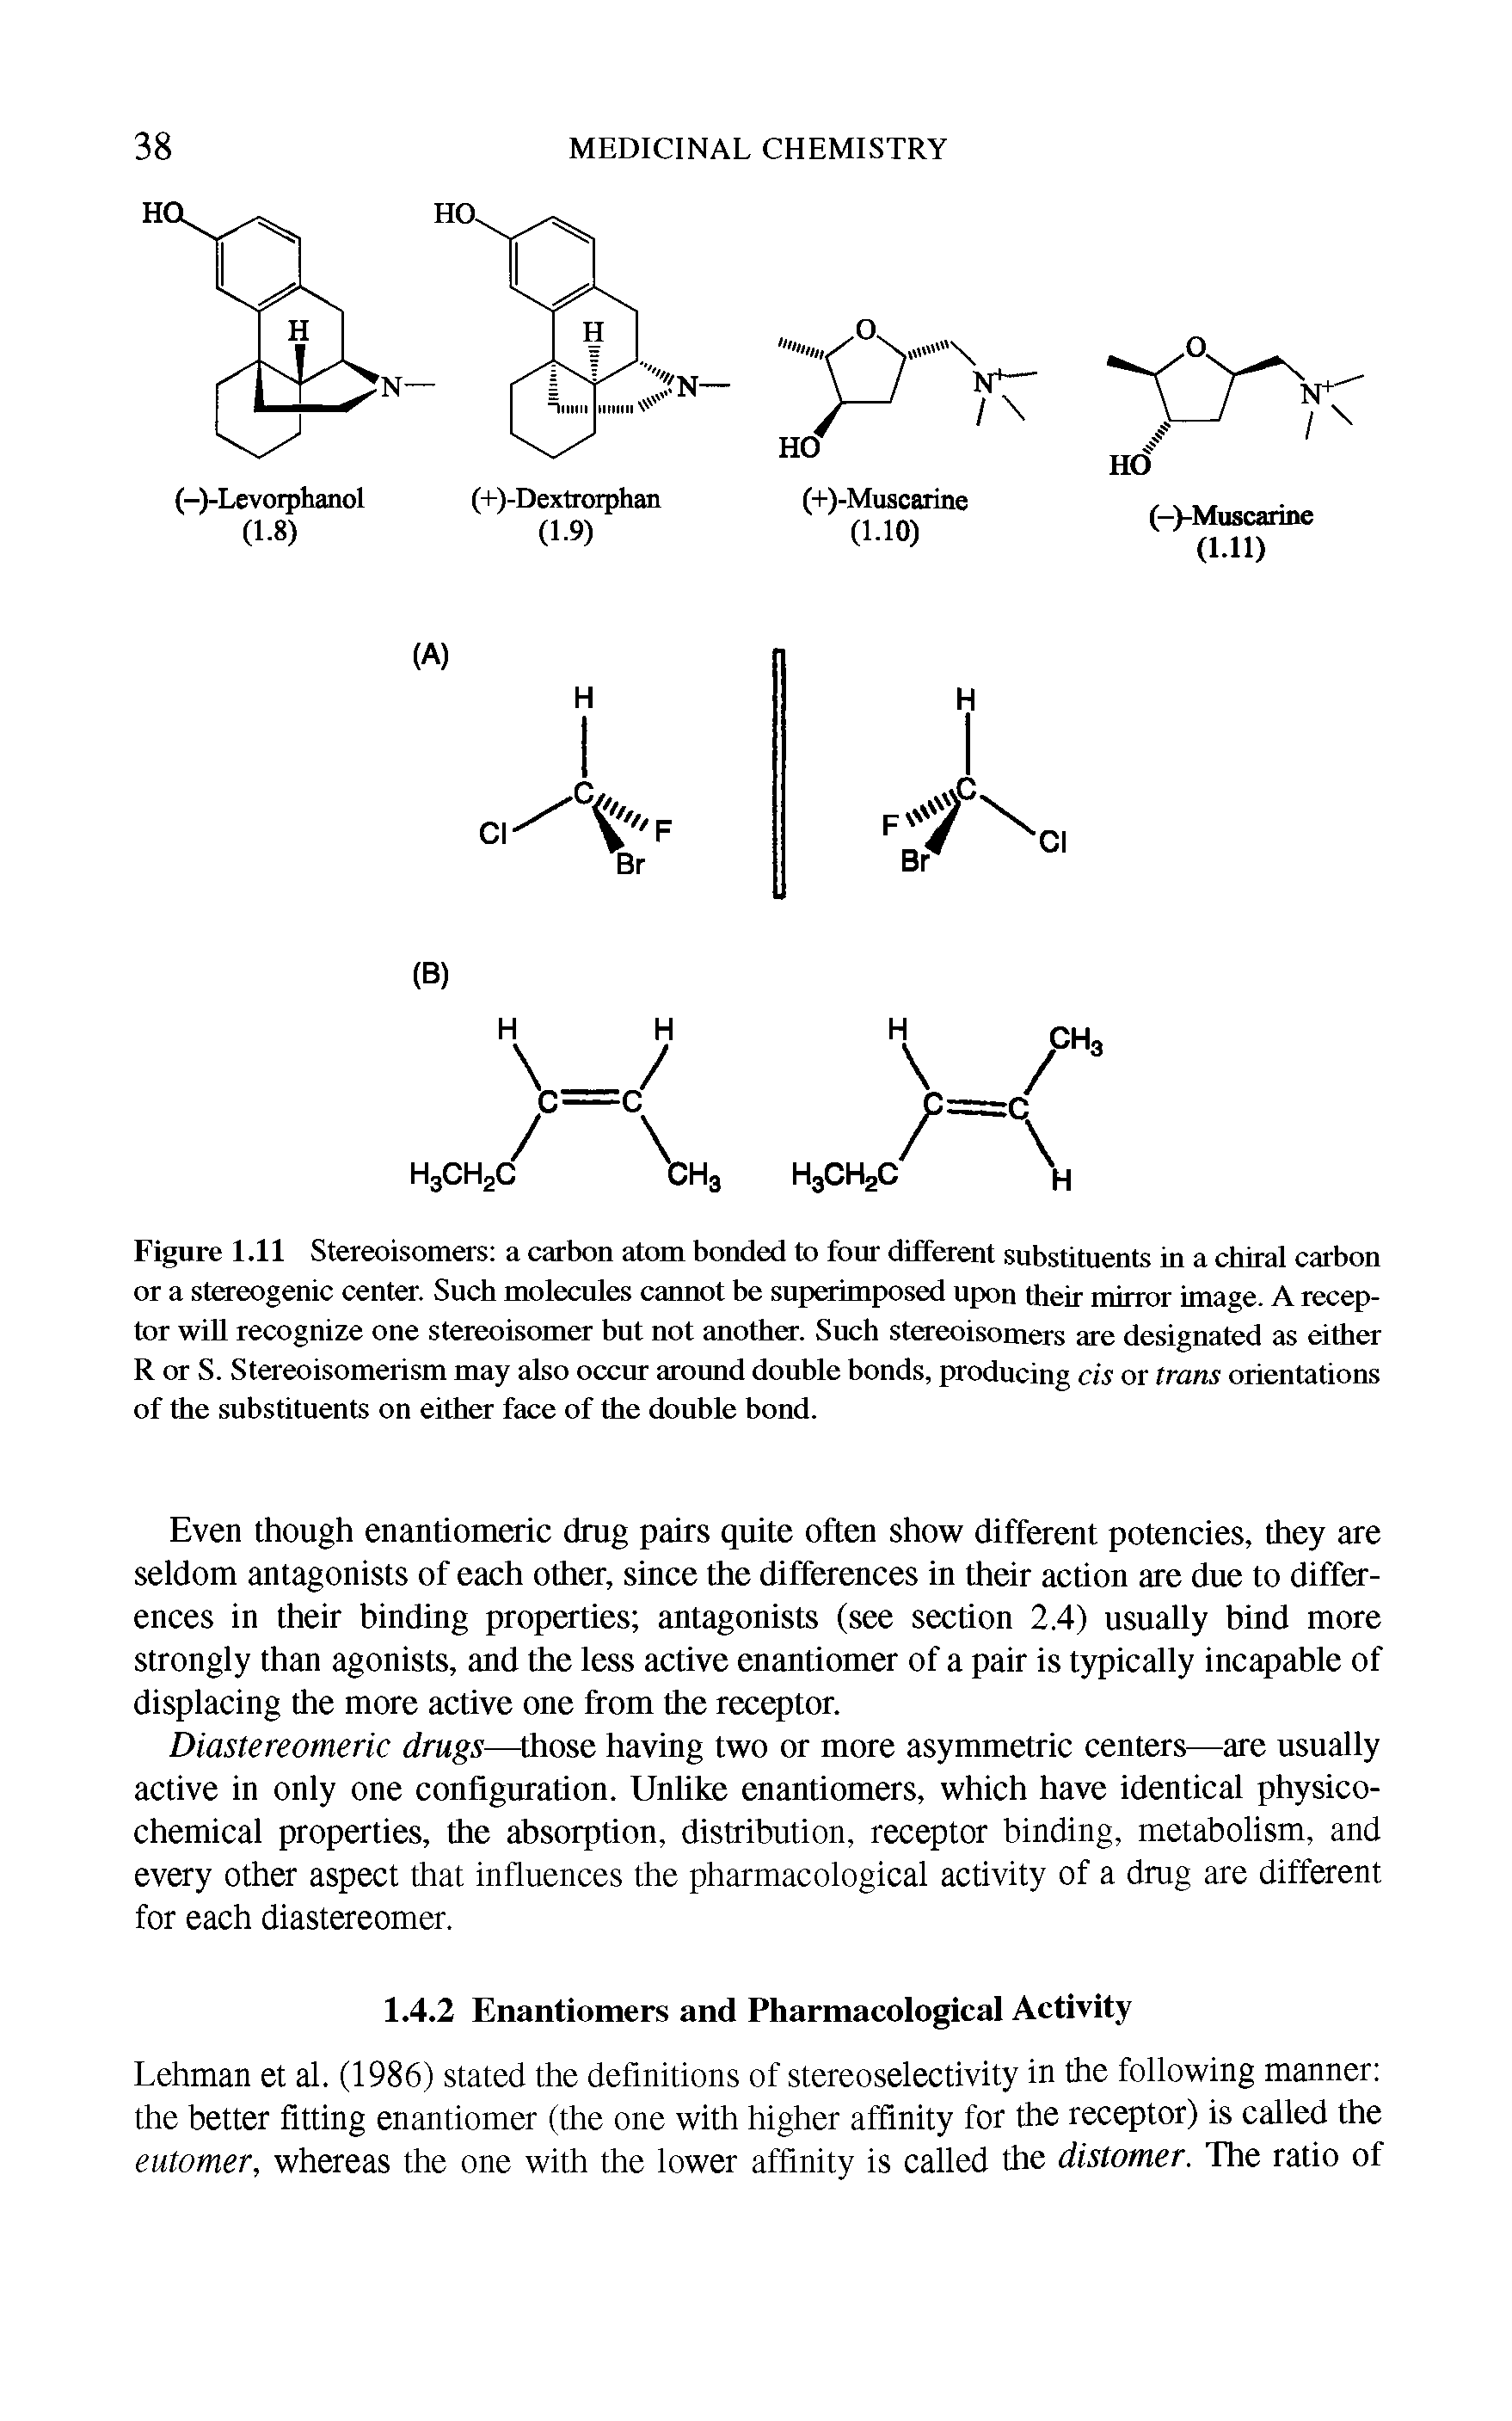 Figure 1.11 Stereoisomers a carbon atom bonded to fonr different substituents in a chiral carbon or a stereogenic center. Such molecules cannot be superimposed upon their mirror image. A receptor will recognize one stereoisomer but not another. Such stereoisomers are designated as either R or S. Stereoisomerism may also occur around double bonds, producing cis or trans orientations of the substituents on either face of the double bond.